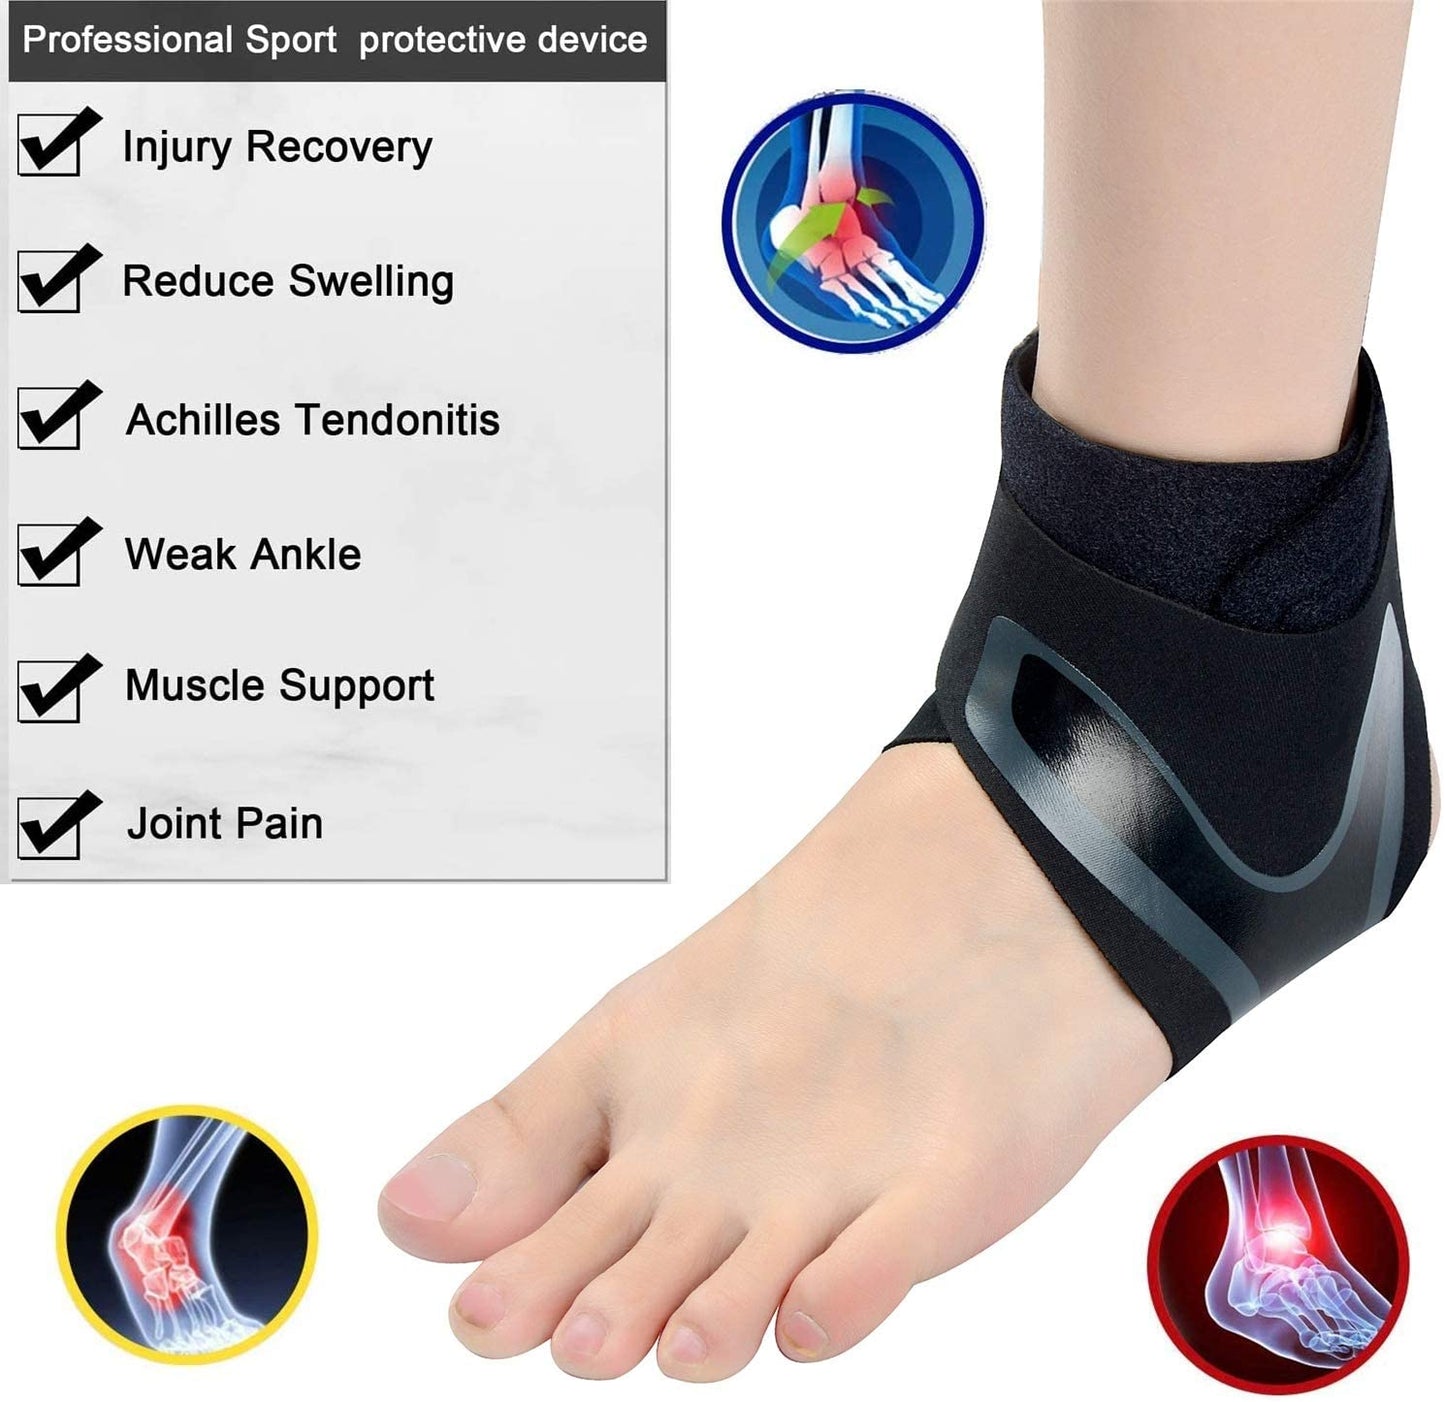 Ankle Support Brace, Adjustable Ankle Brace with Breathable & Elastic Nylon Material, Comfortable Ankle Wrap Sports Protect Against Chronic Ankle Strain Sprains Fatigue